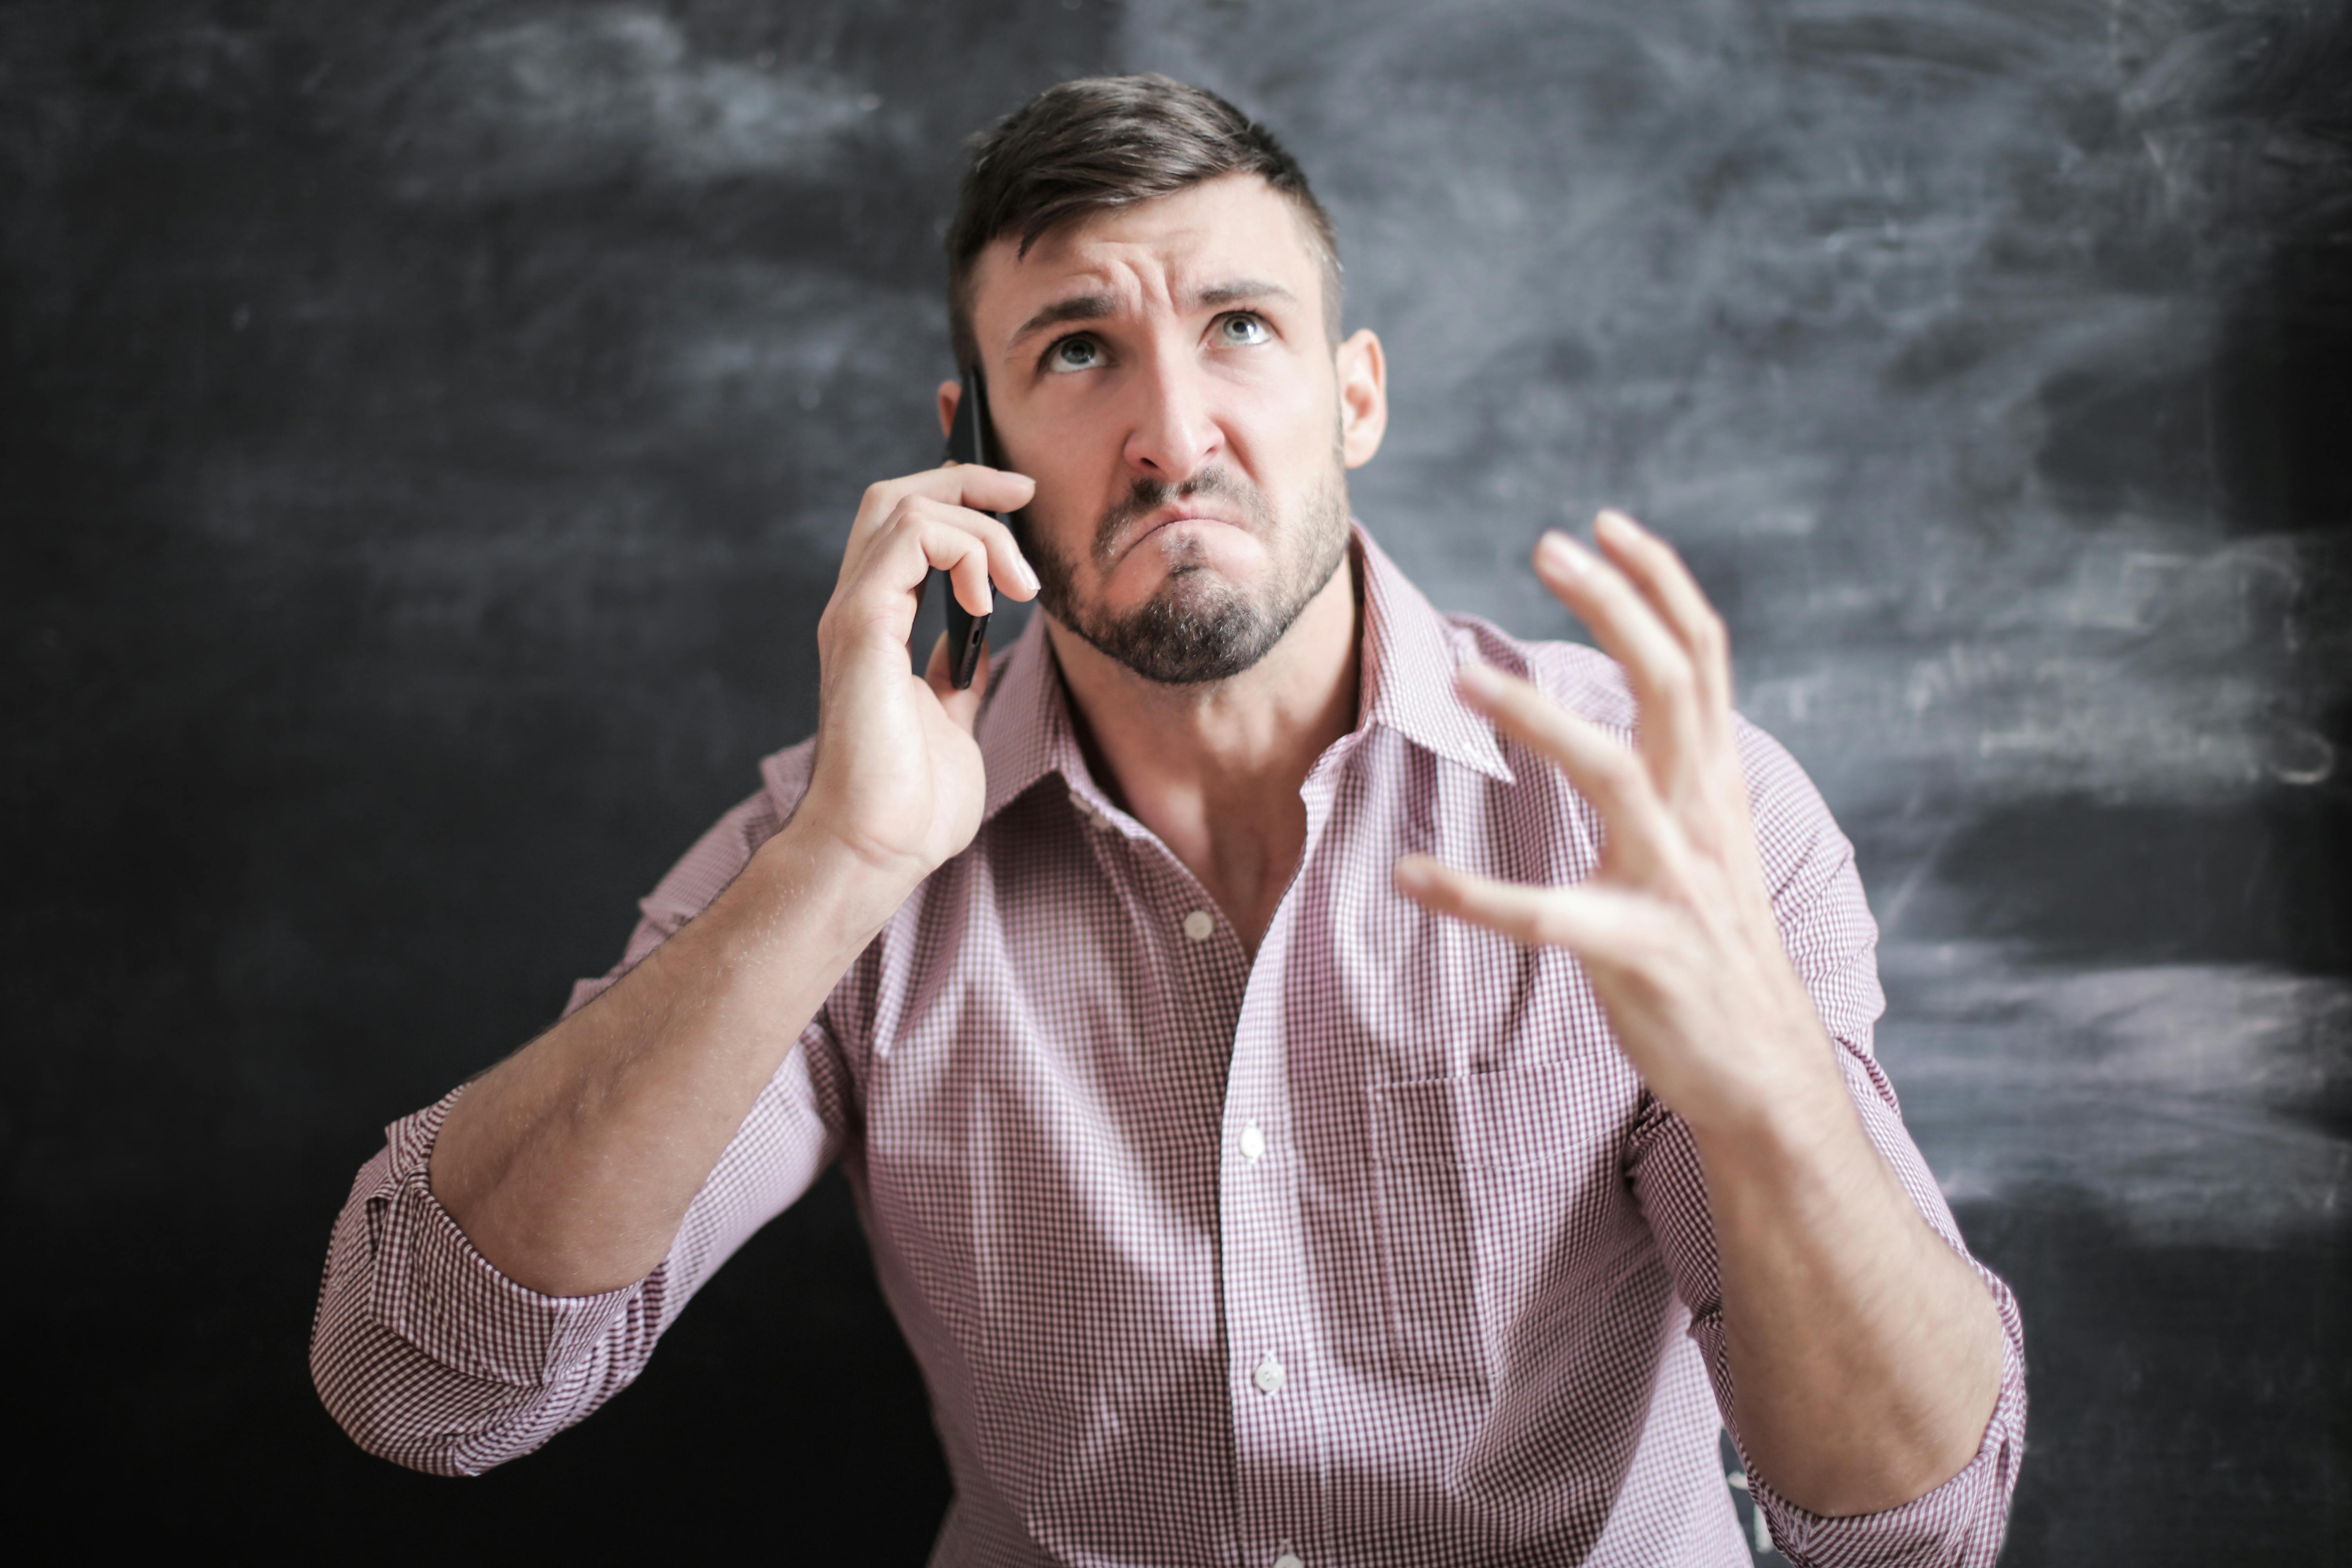 An angry man on the phone | Source: Pexels